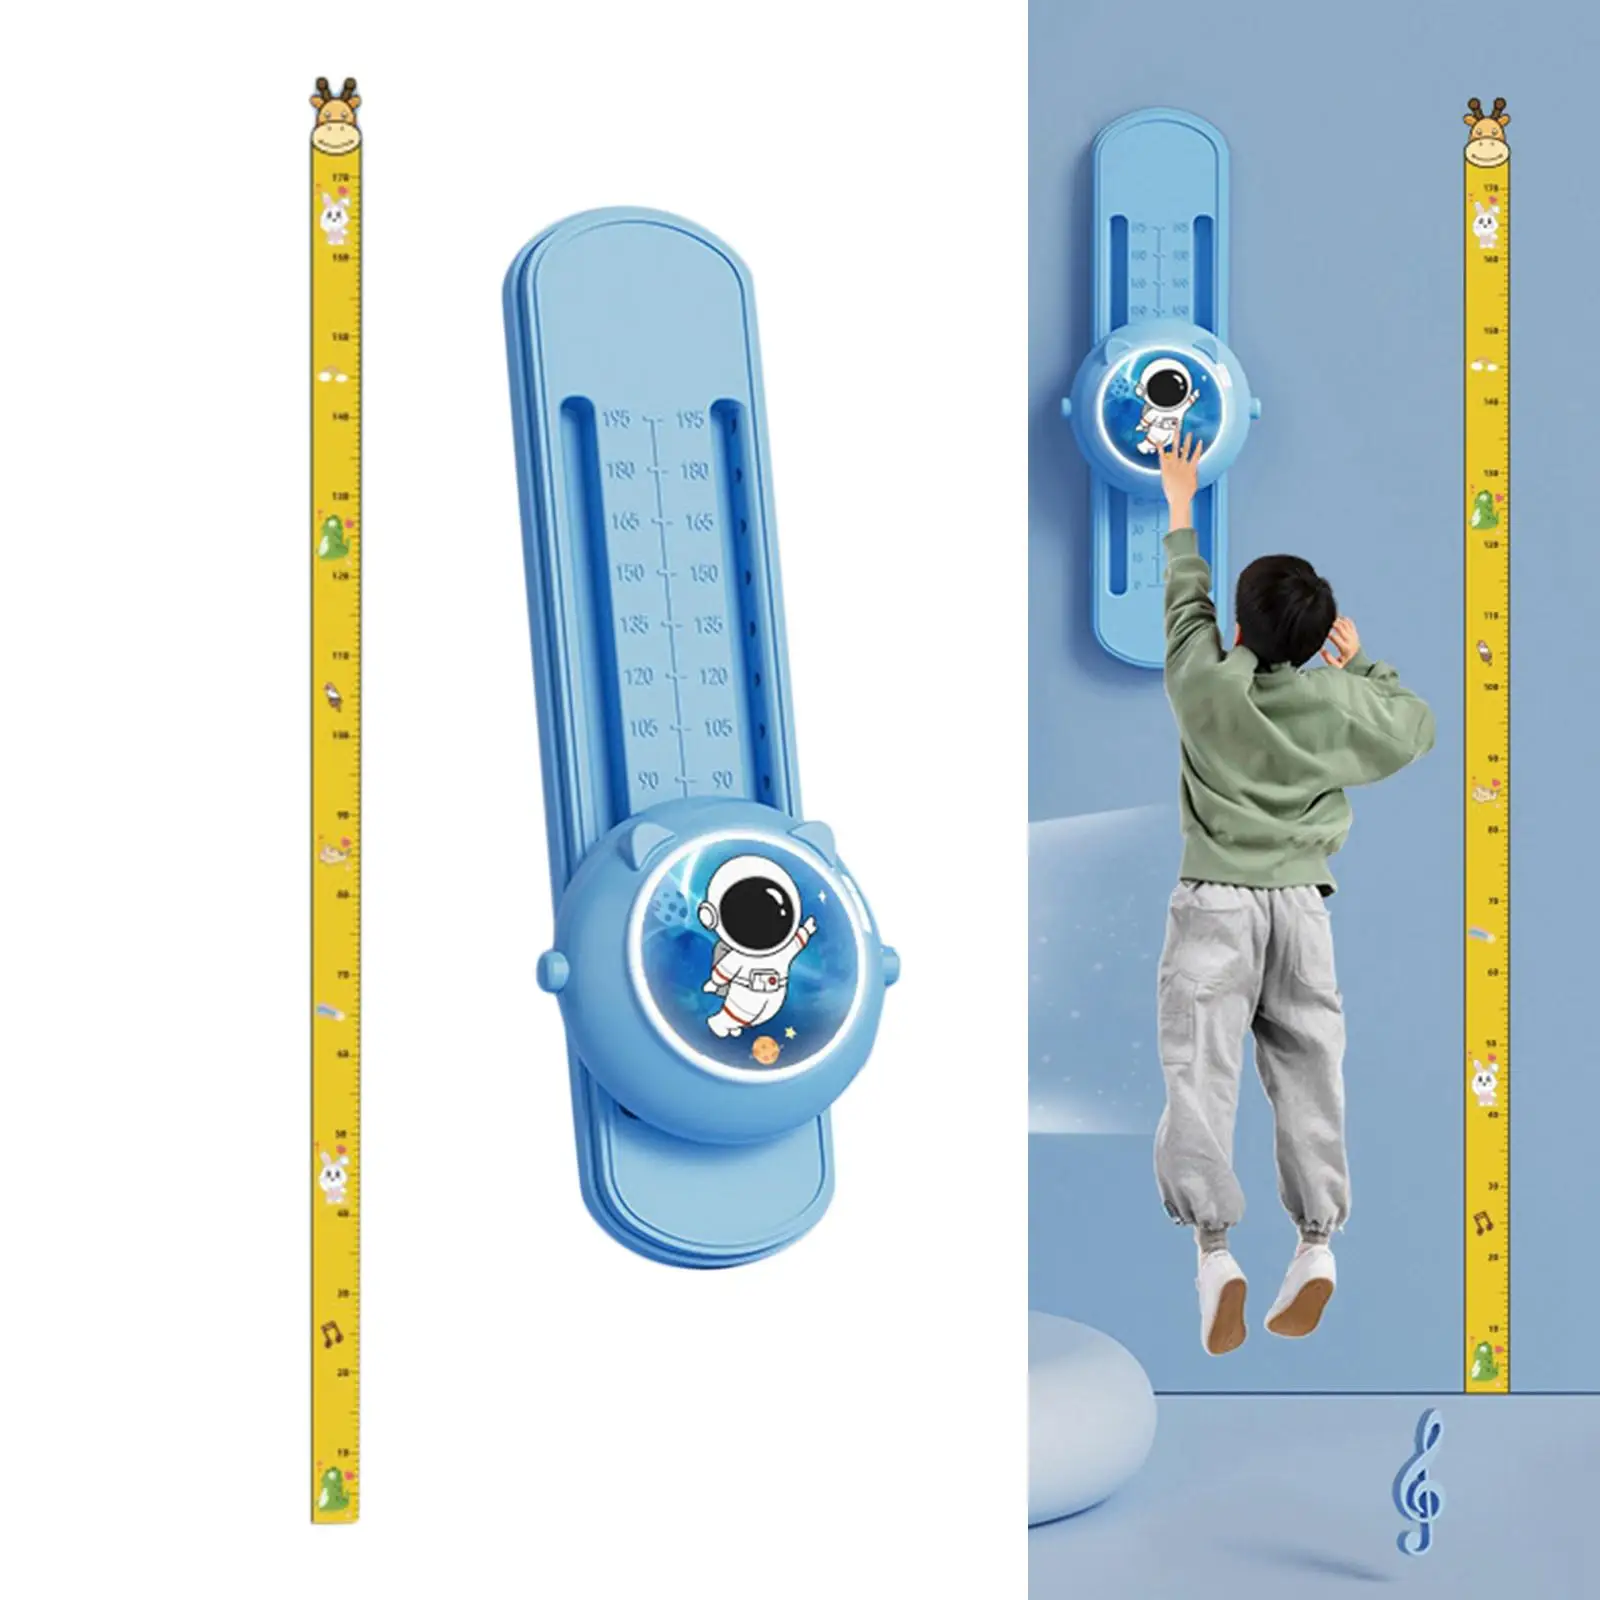 Jump Training Equipment Parent Child Interactive Toy for Bedroom Home